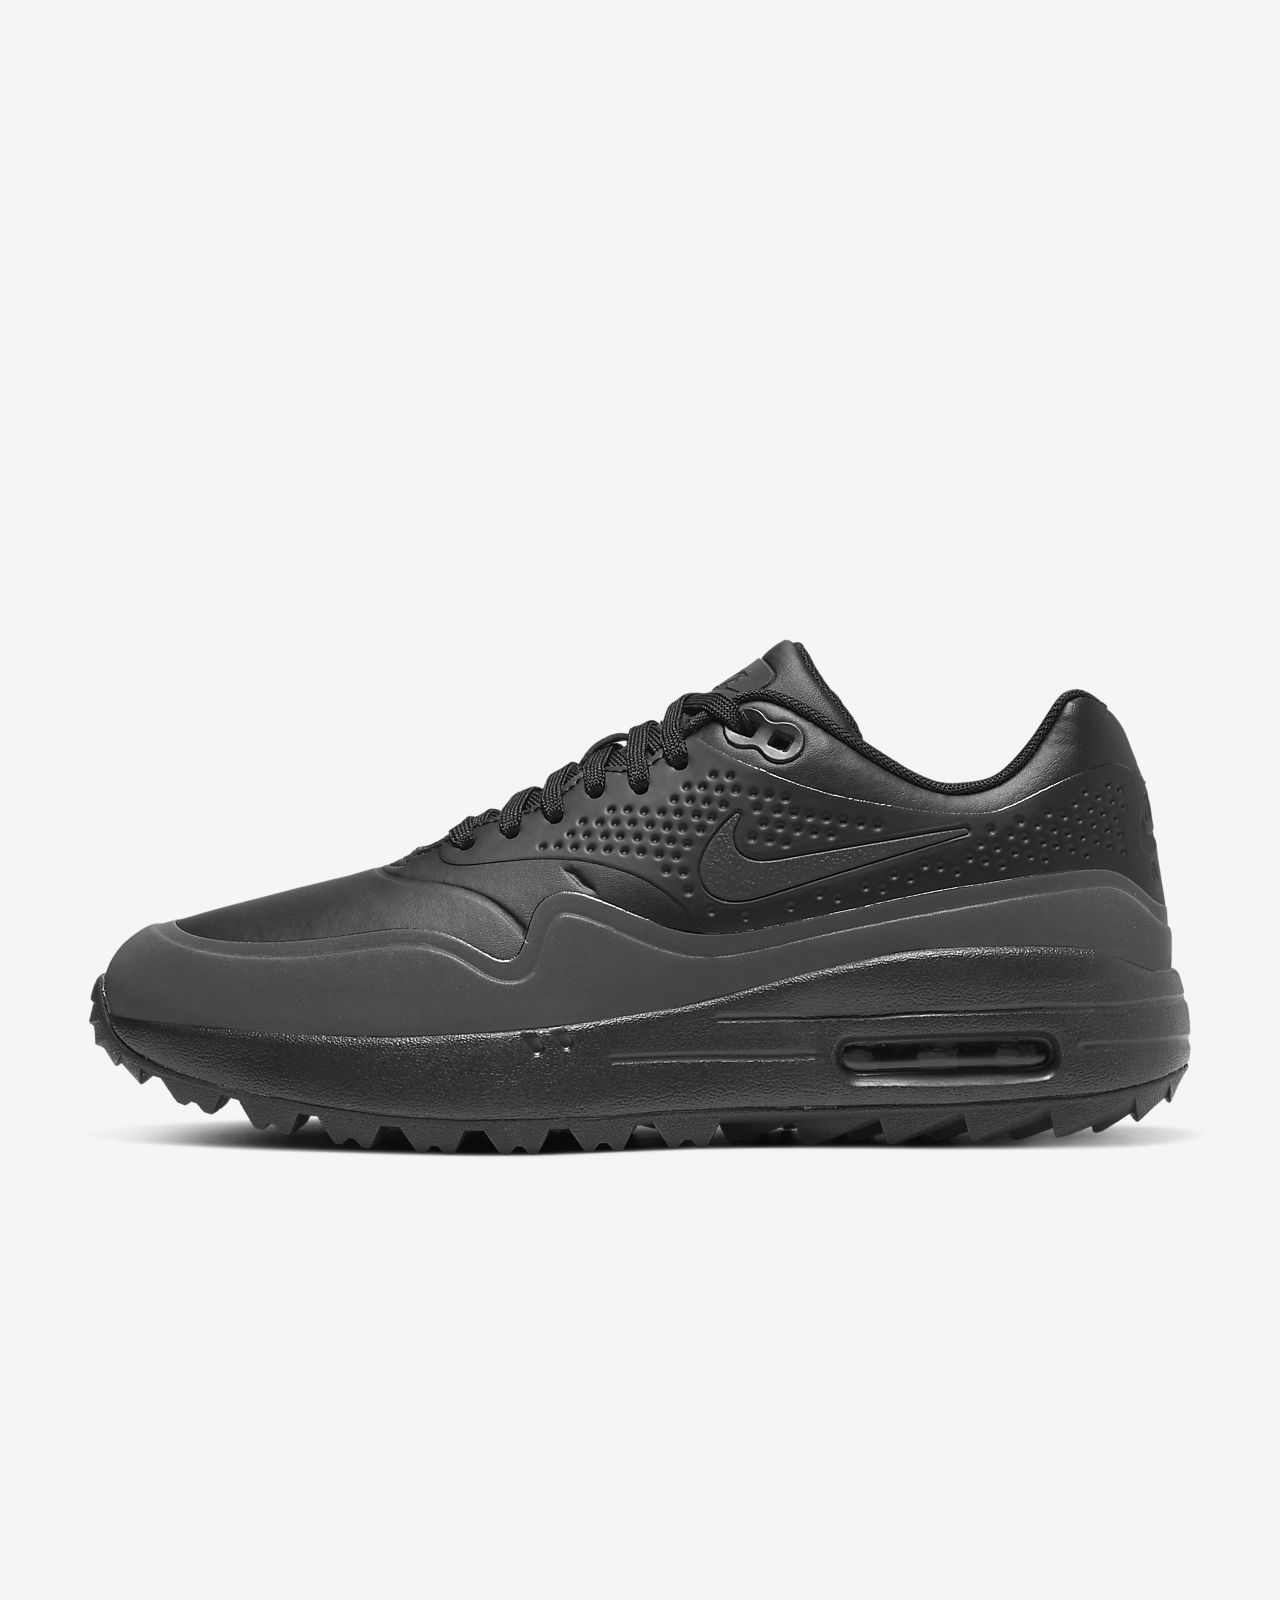 air max nuove donna